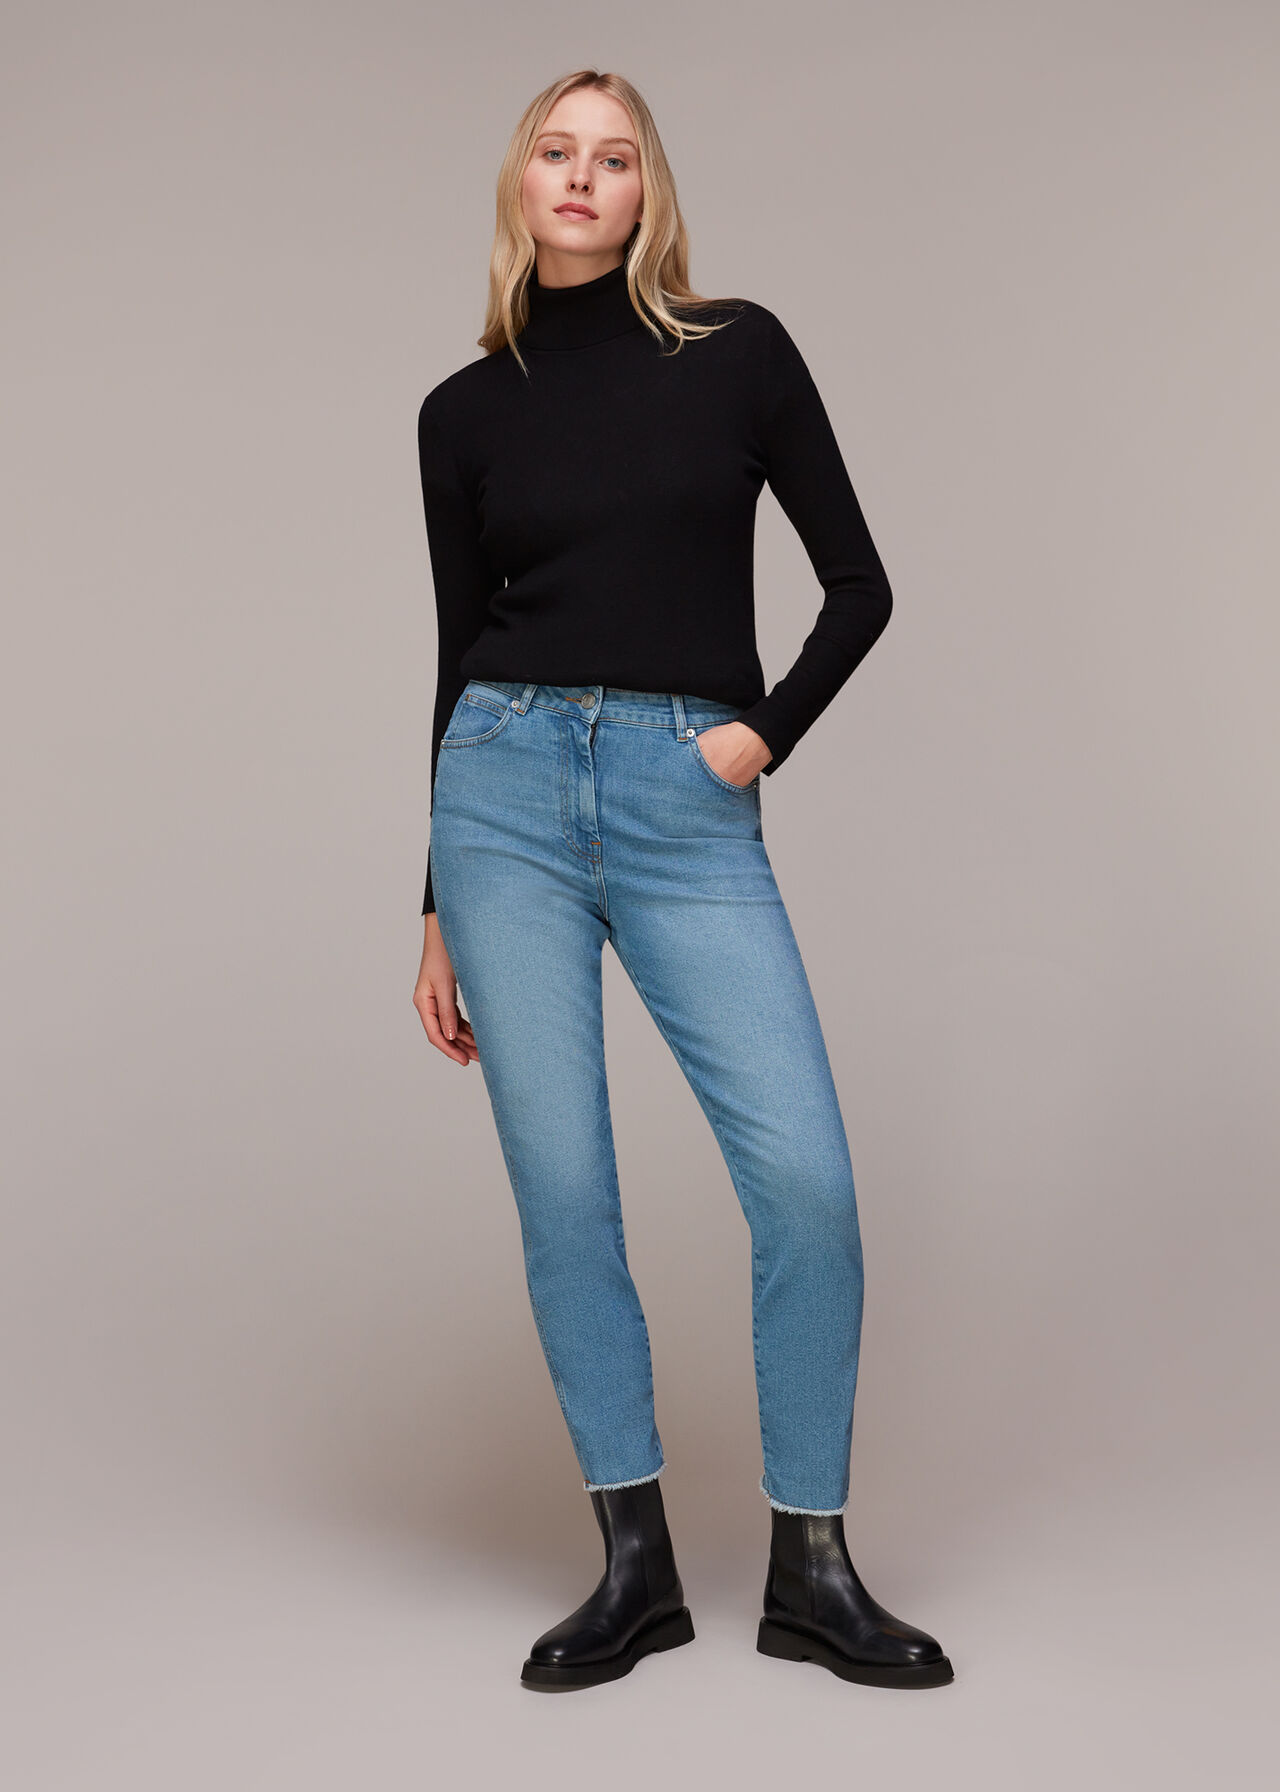 Blue High-Waisted Slim Jeans With Frayed Hem, Whistles